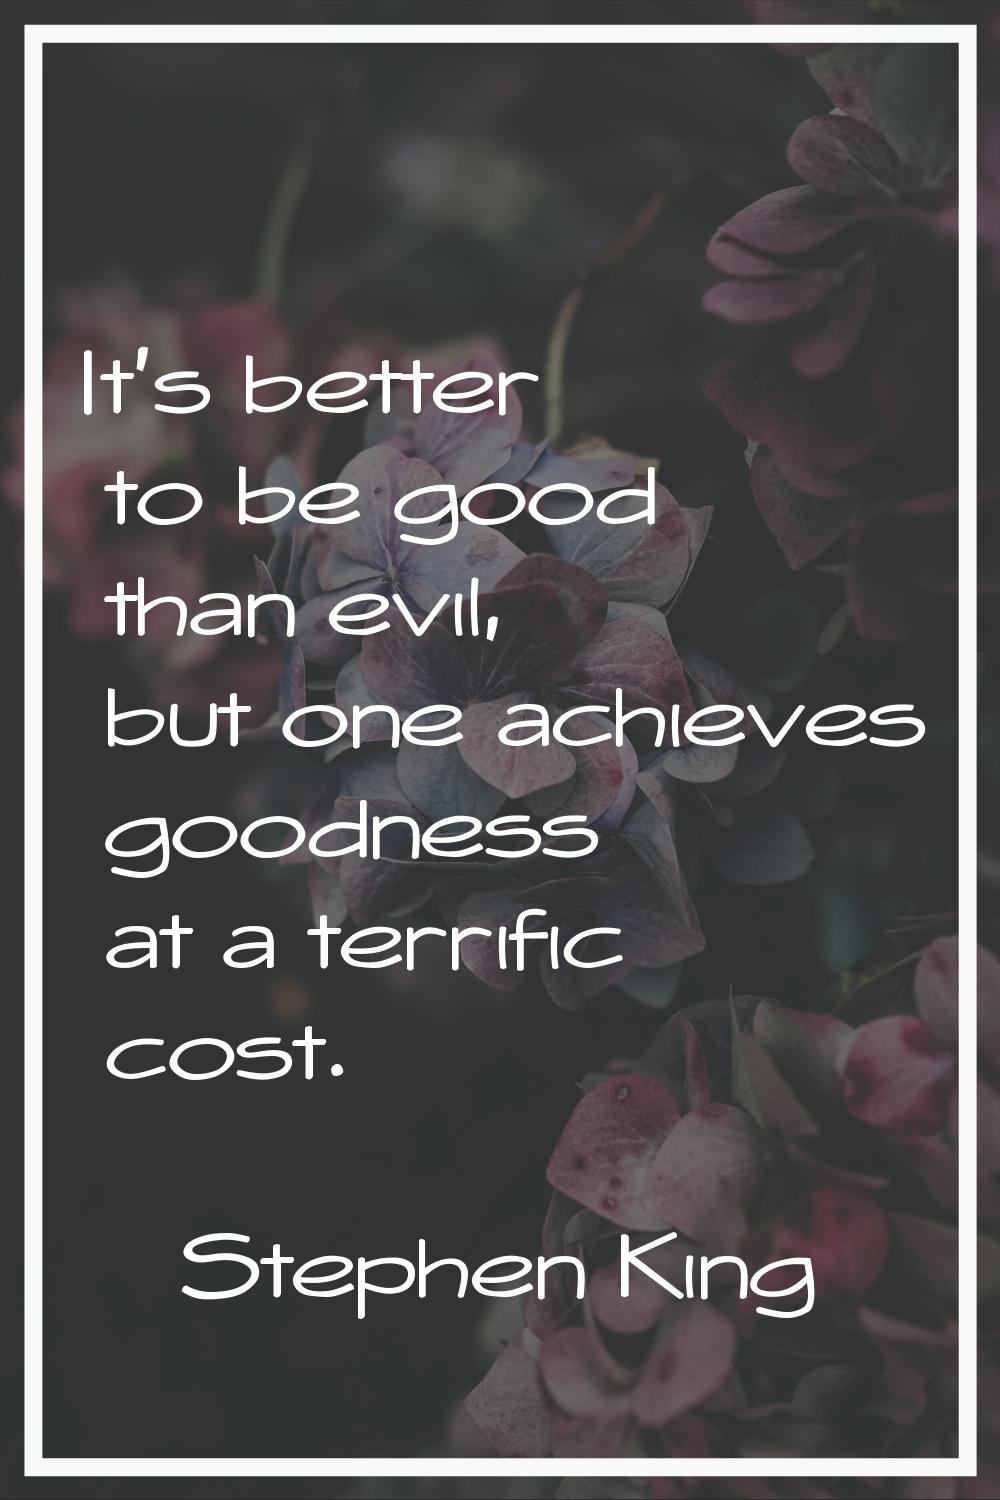 It's better to be good than evil, but one achieves goodness at a terrific cost.